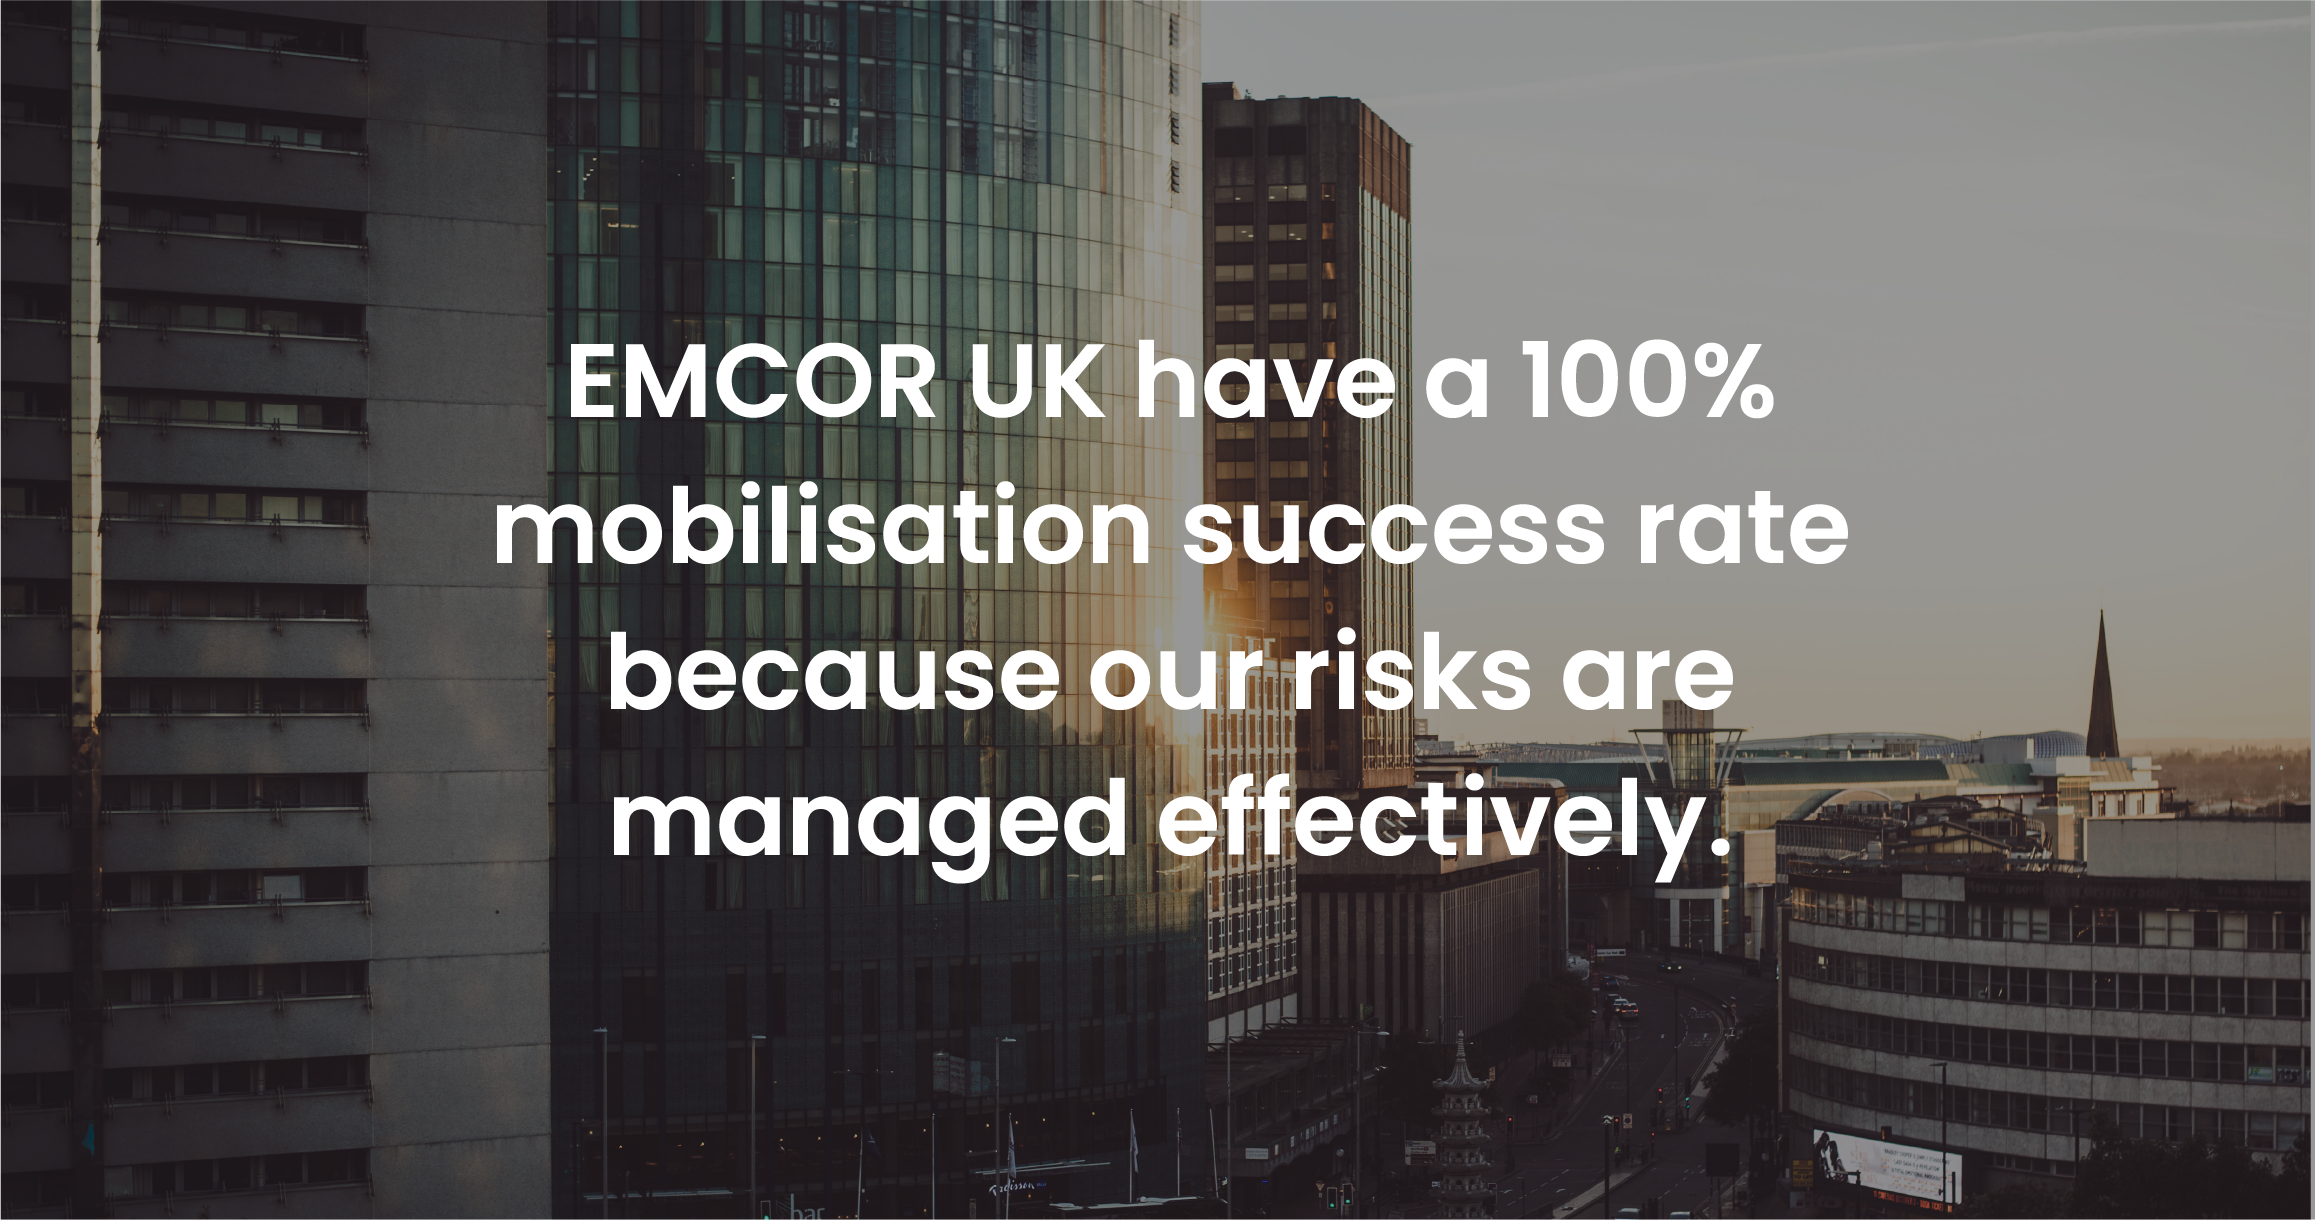 EMCOR UK has a 100% mobilsation success rate because our risks are managed successfully